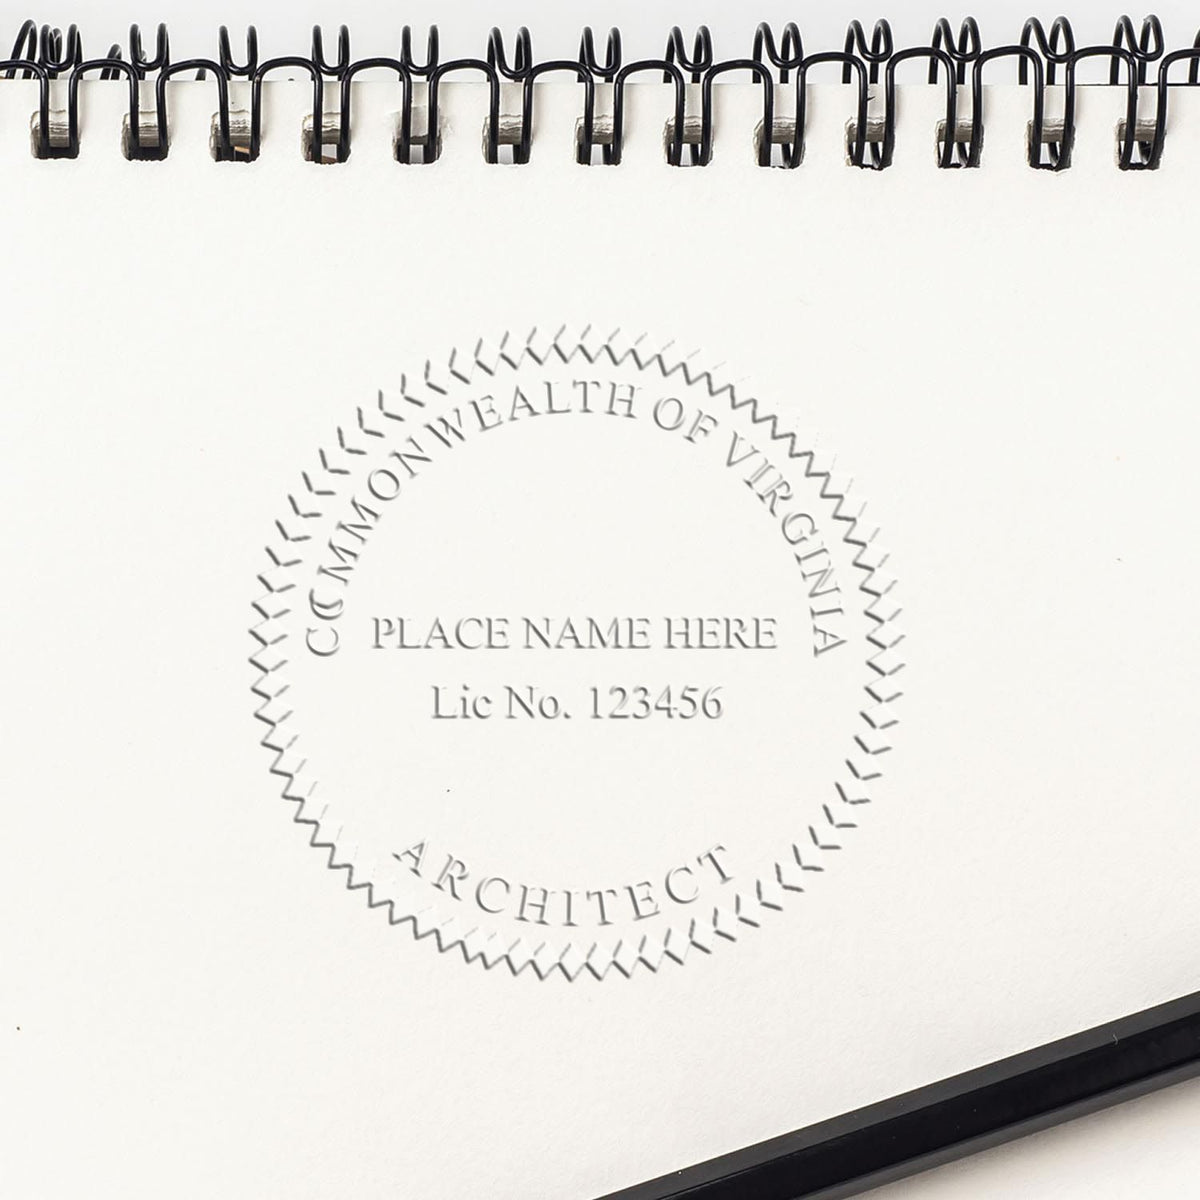 A stamped impression of the State of Virginia Architectural Seal Embosser in this stylish lifestyle photo, setting the tone for a unique and personalized product.